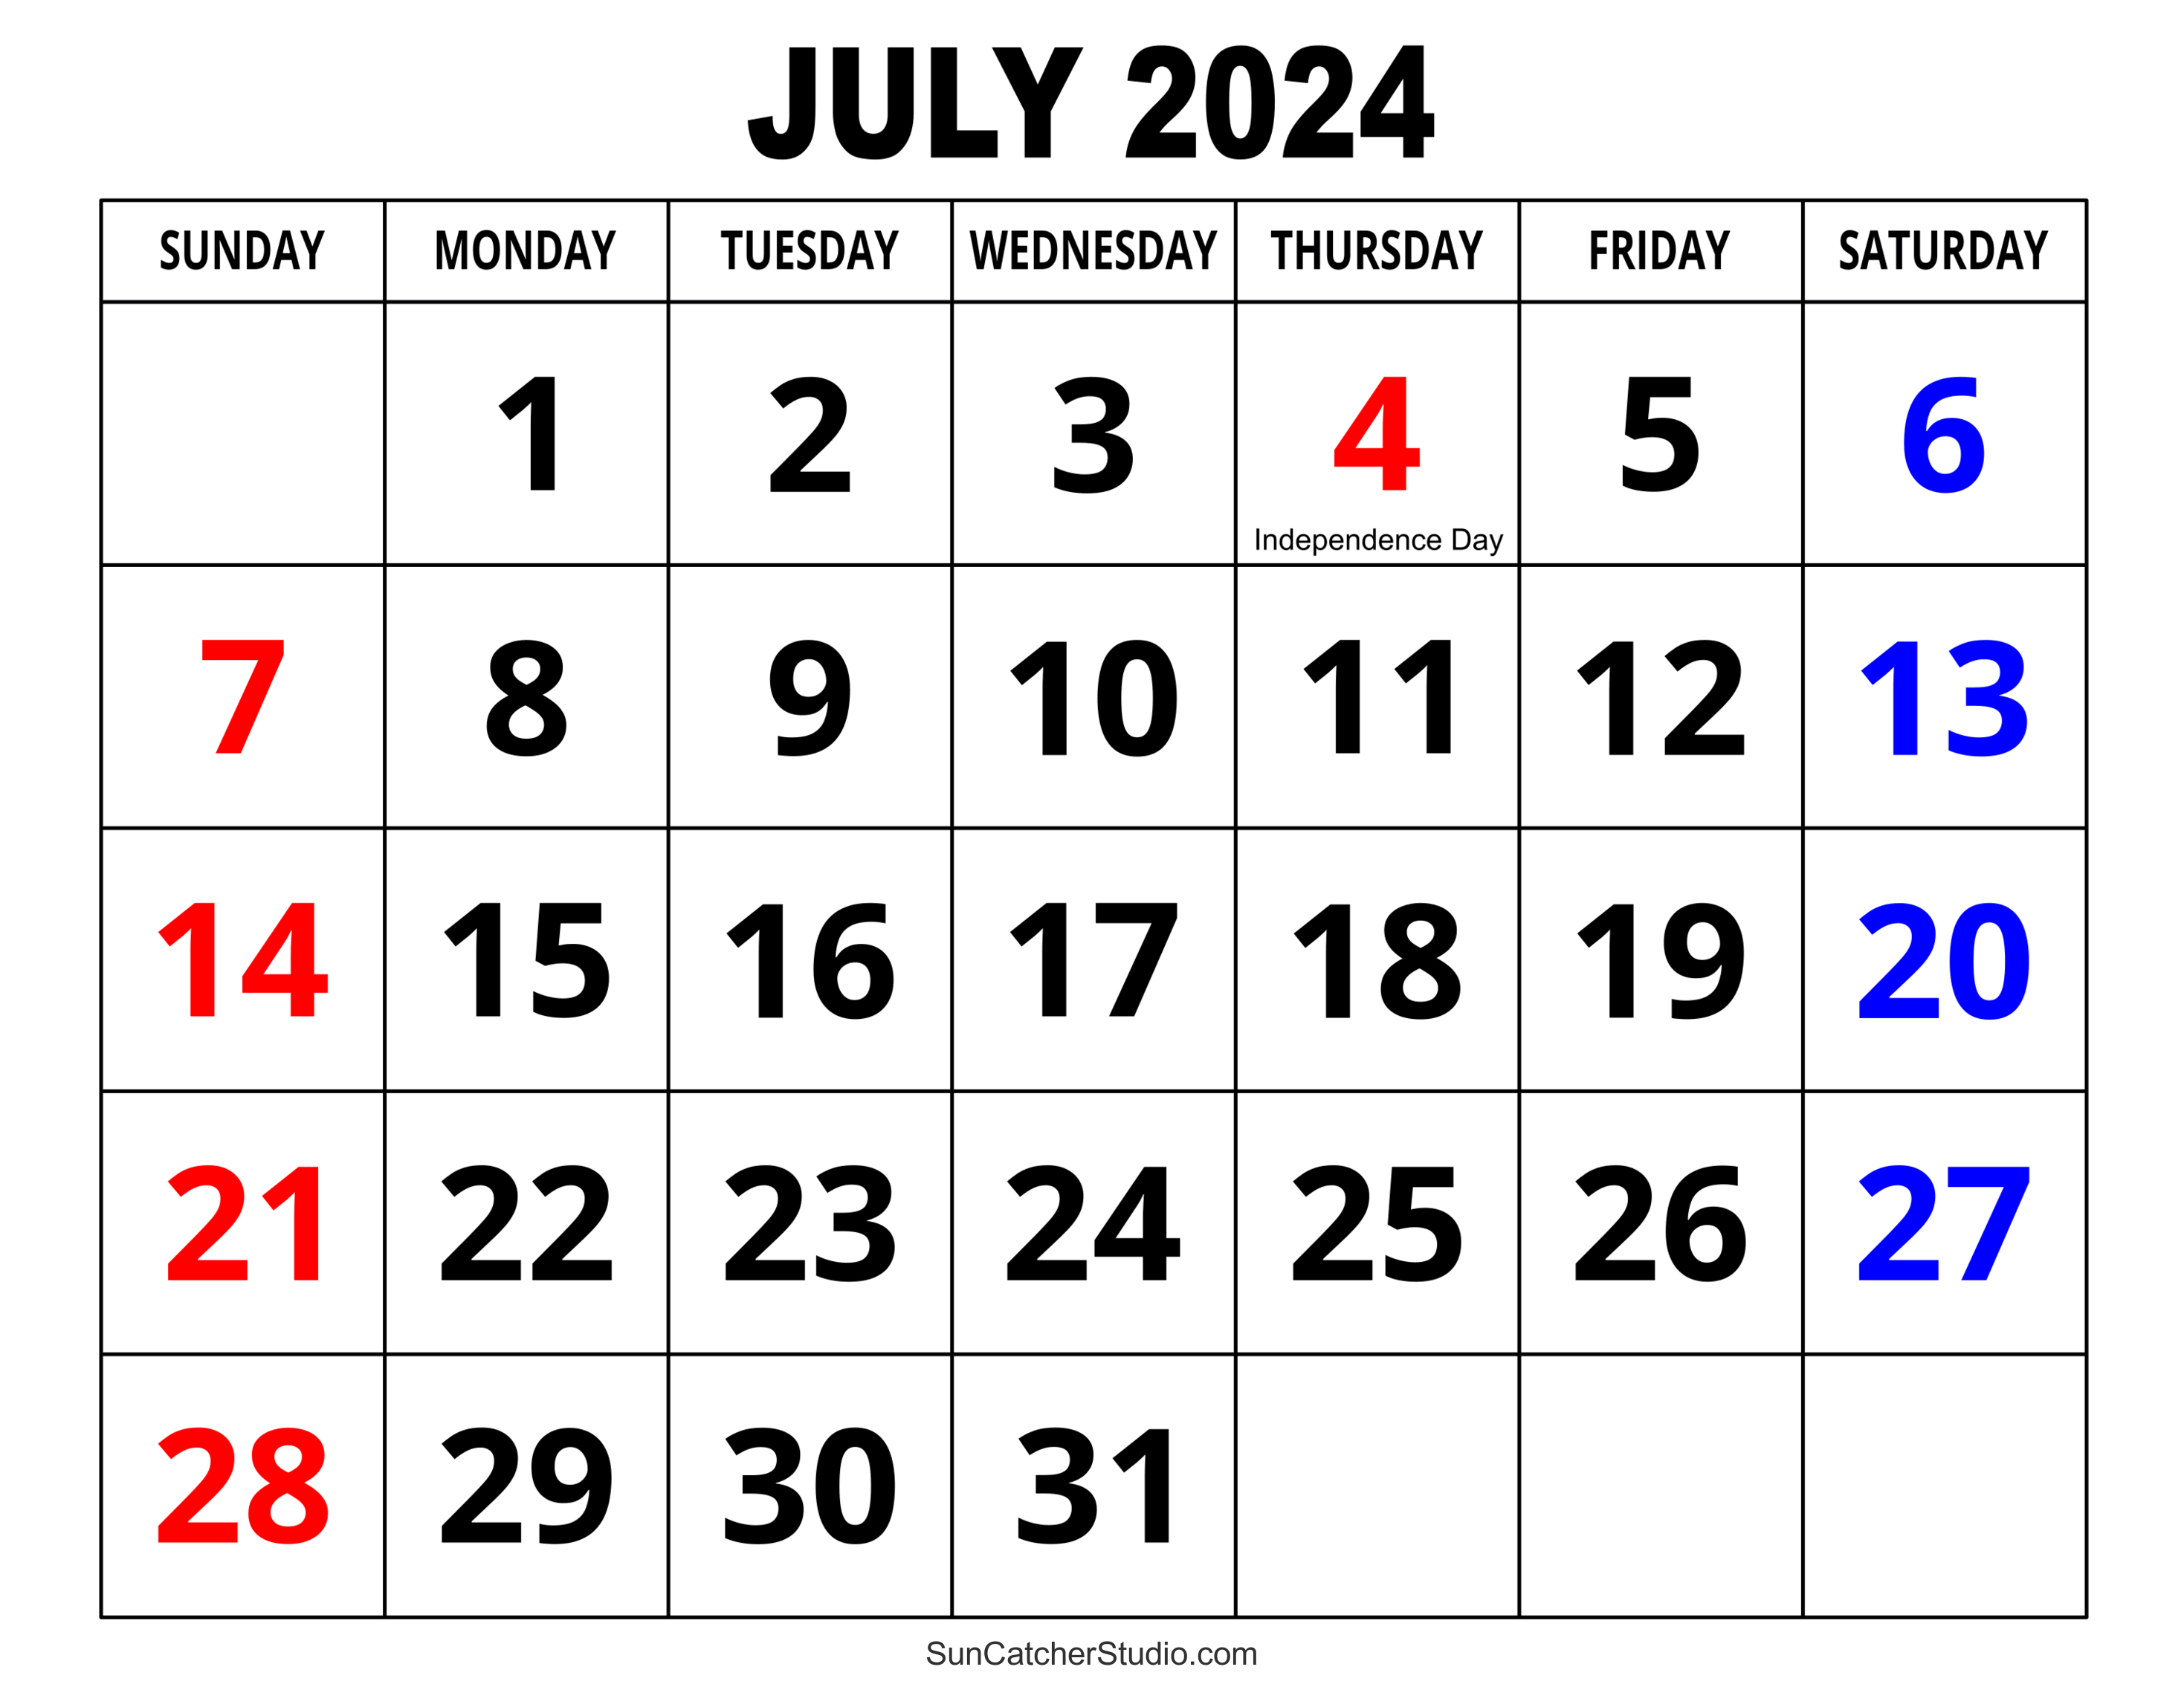 July 2024 Calendar (Free Printable) – Diy Projects, Patterns throughout 26 July 2024 Calendar Printable